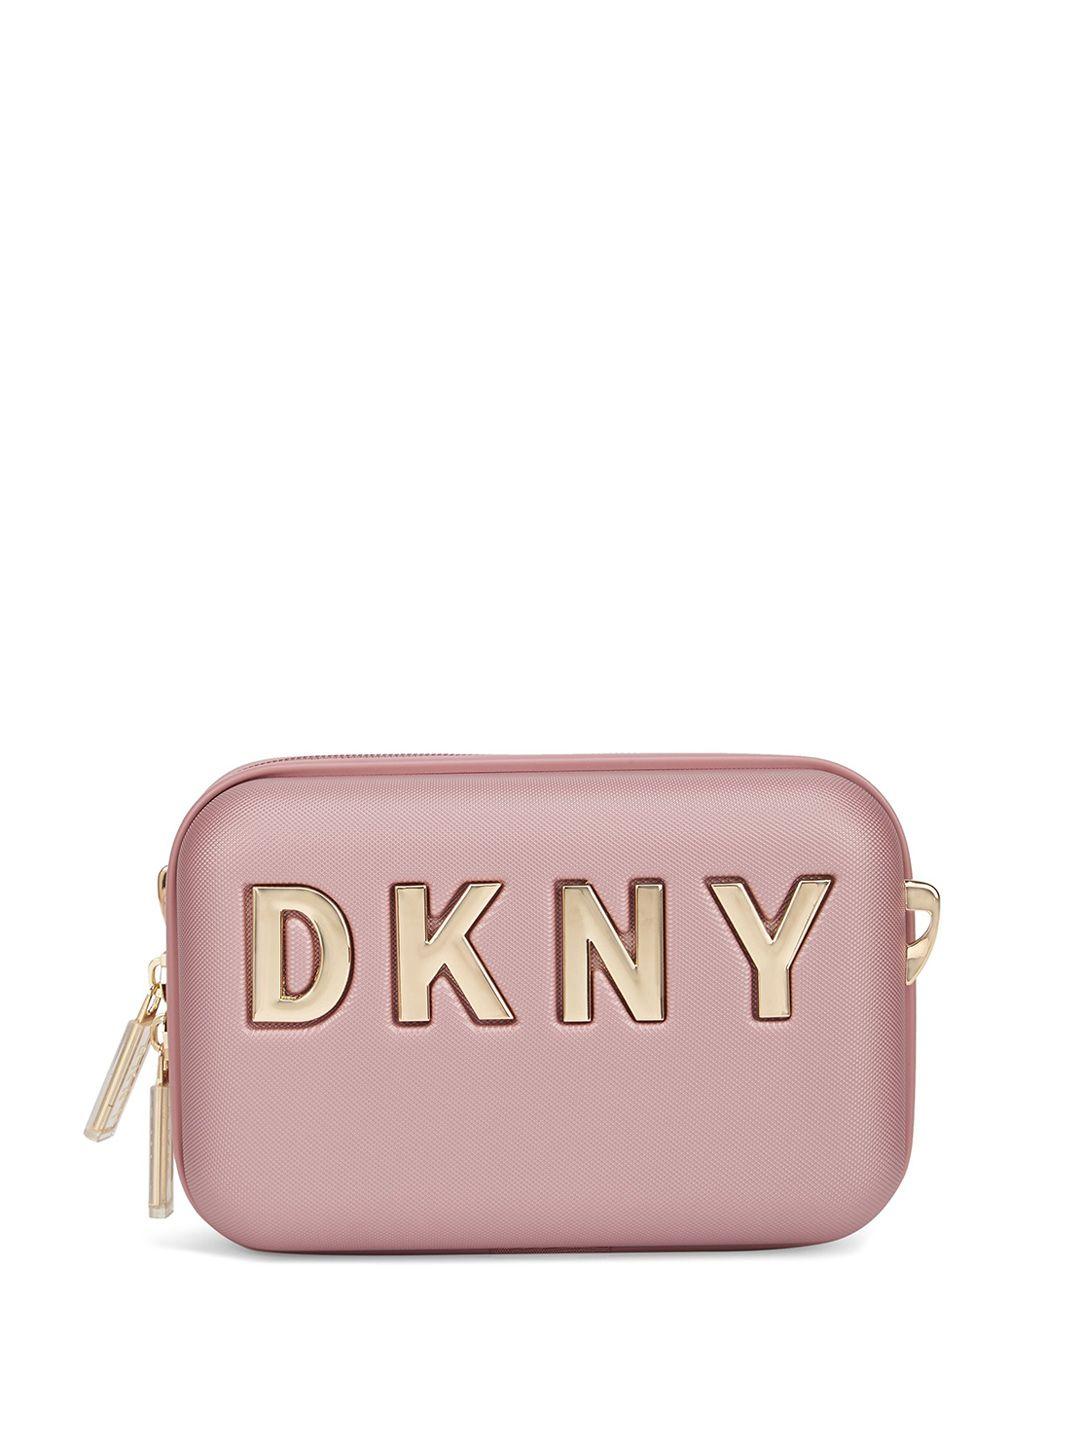 dkny allure vintage abs hard beauty case makeup pouch